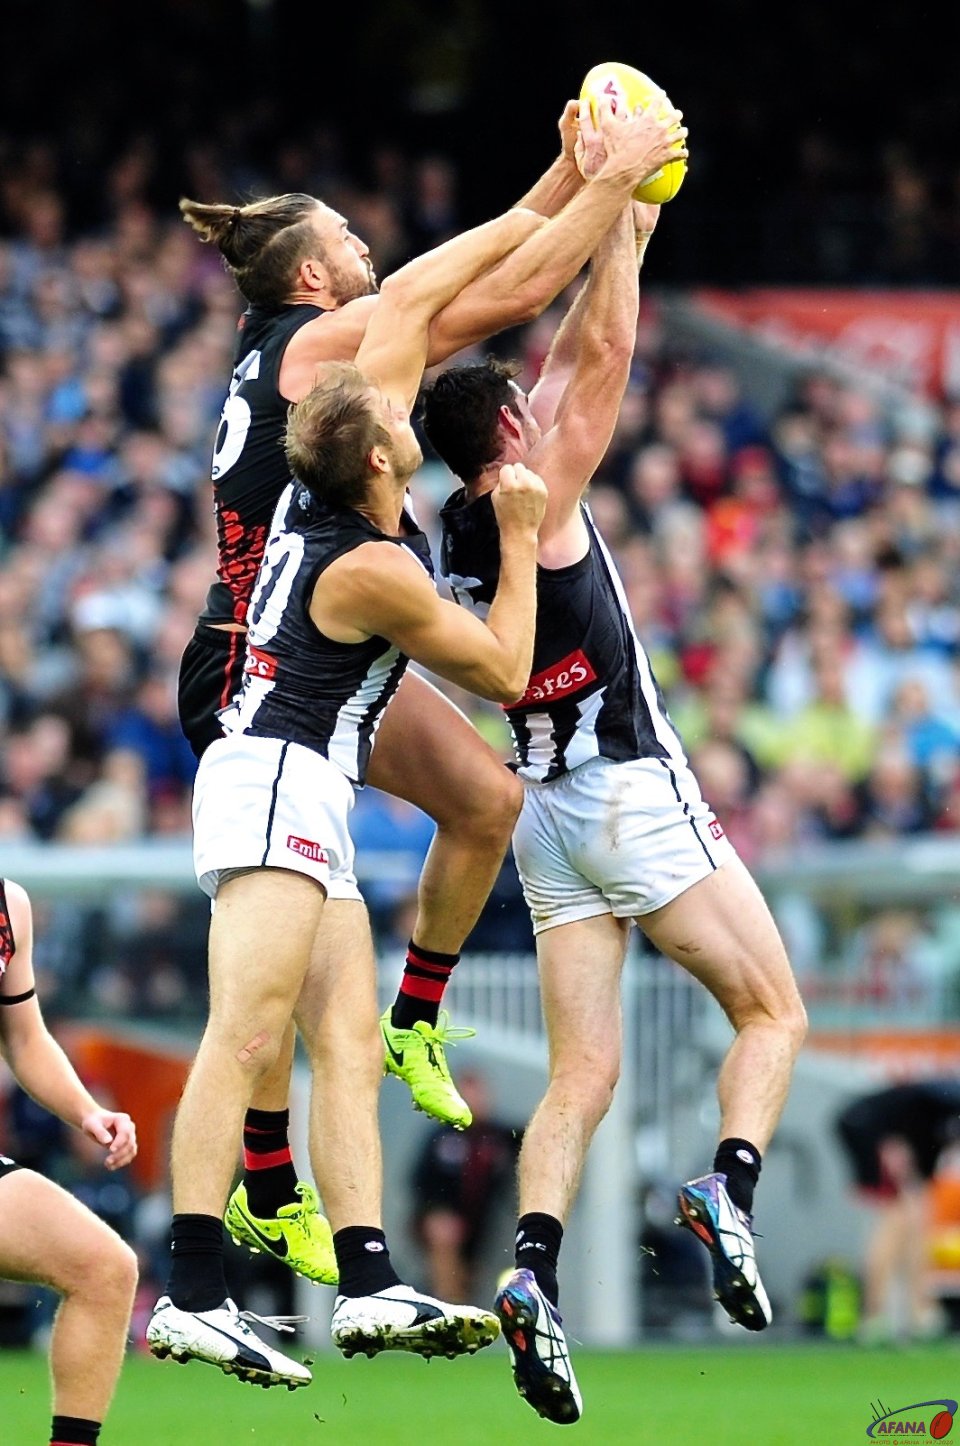 Cale Hooker takes a pack mark over Goldsack and Reid